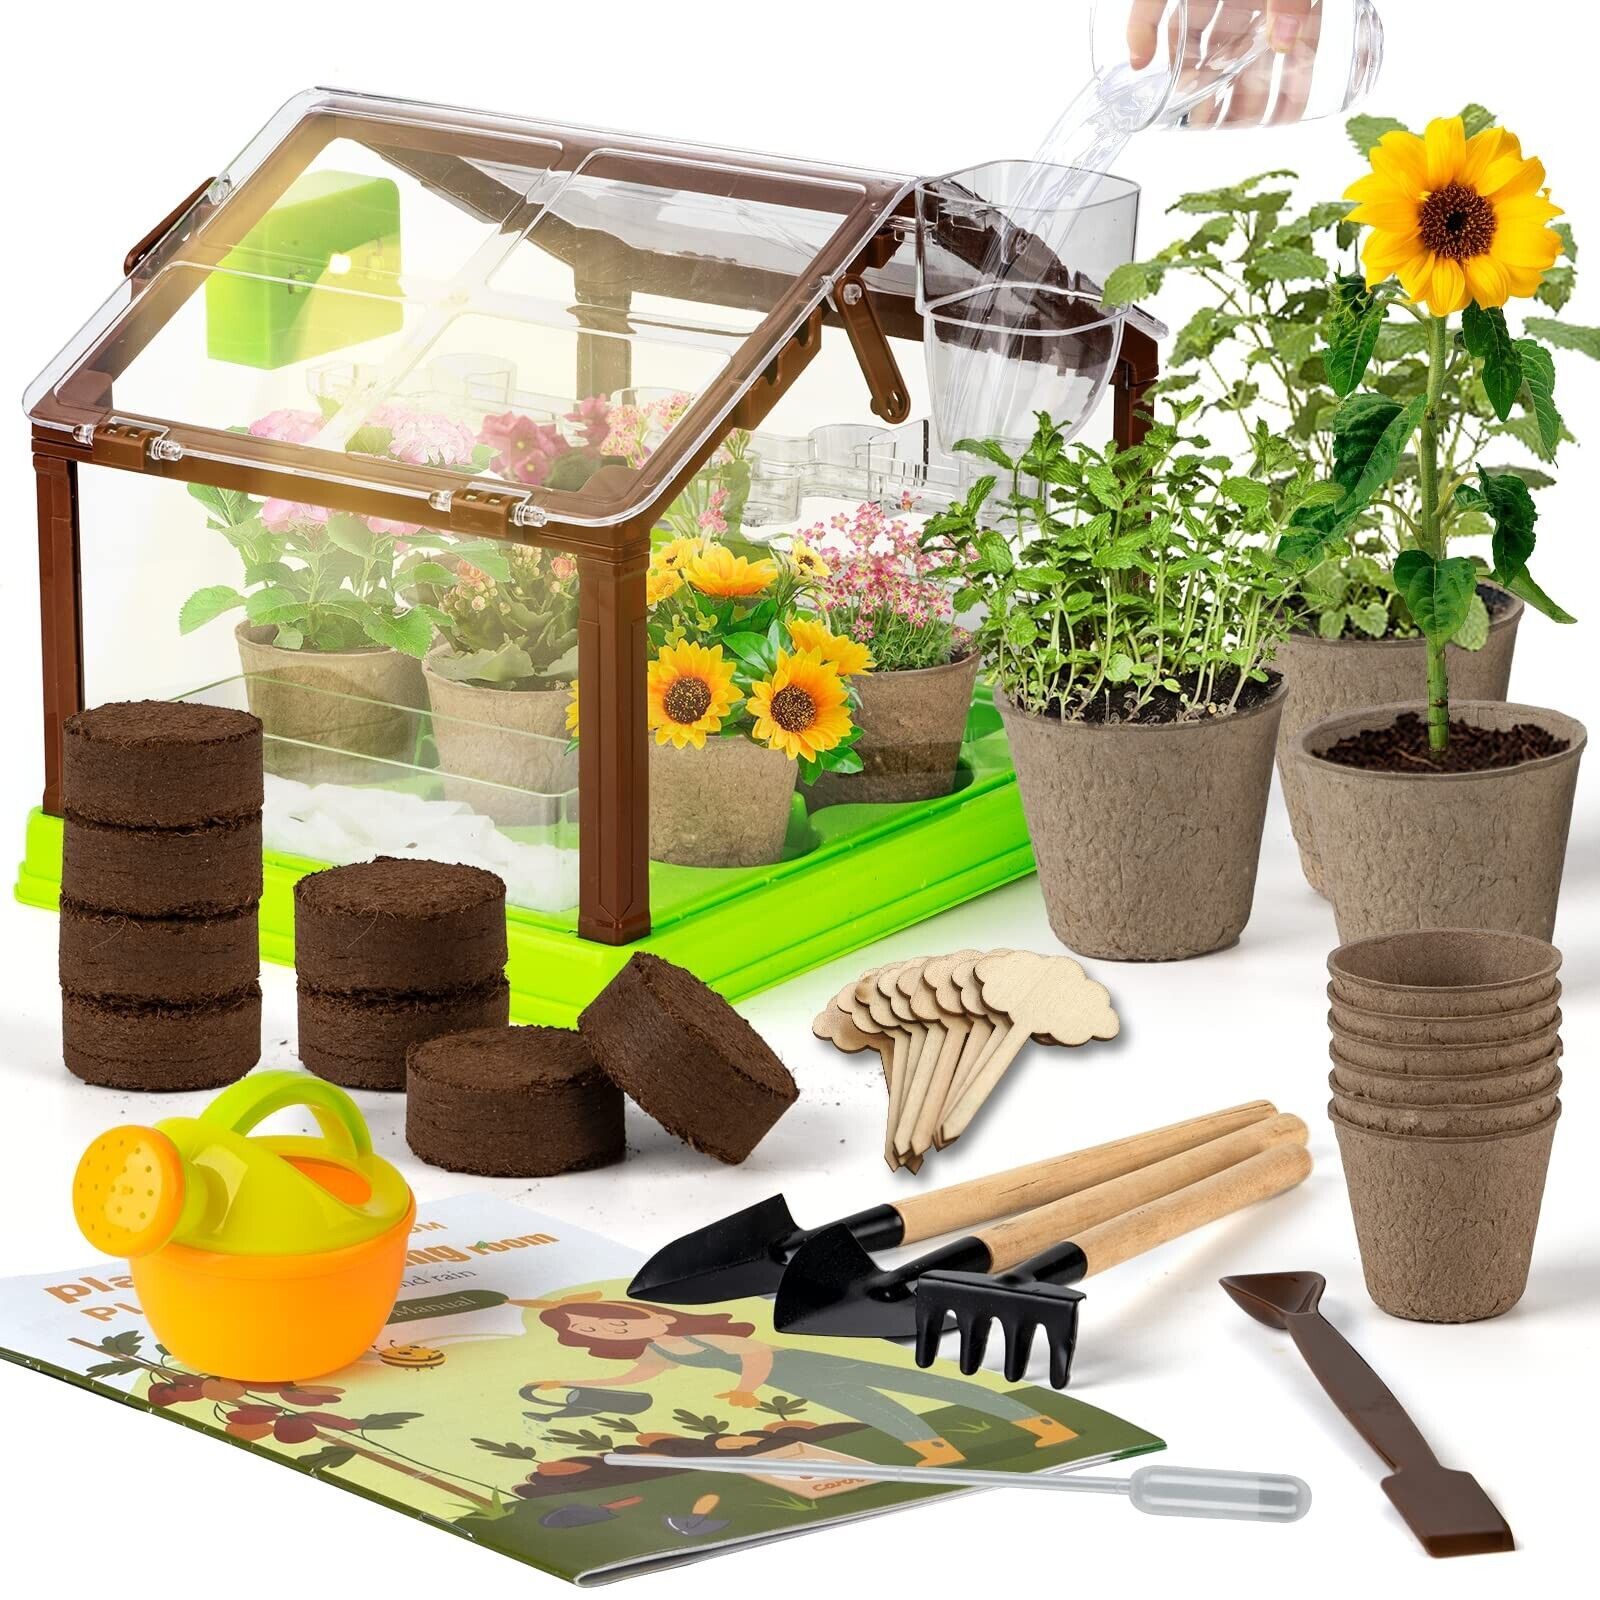 Plant Kit for Kids,Grow House with Irrigation System,Growing Room Garden Tool...